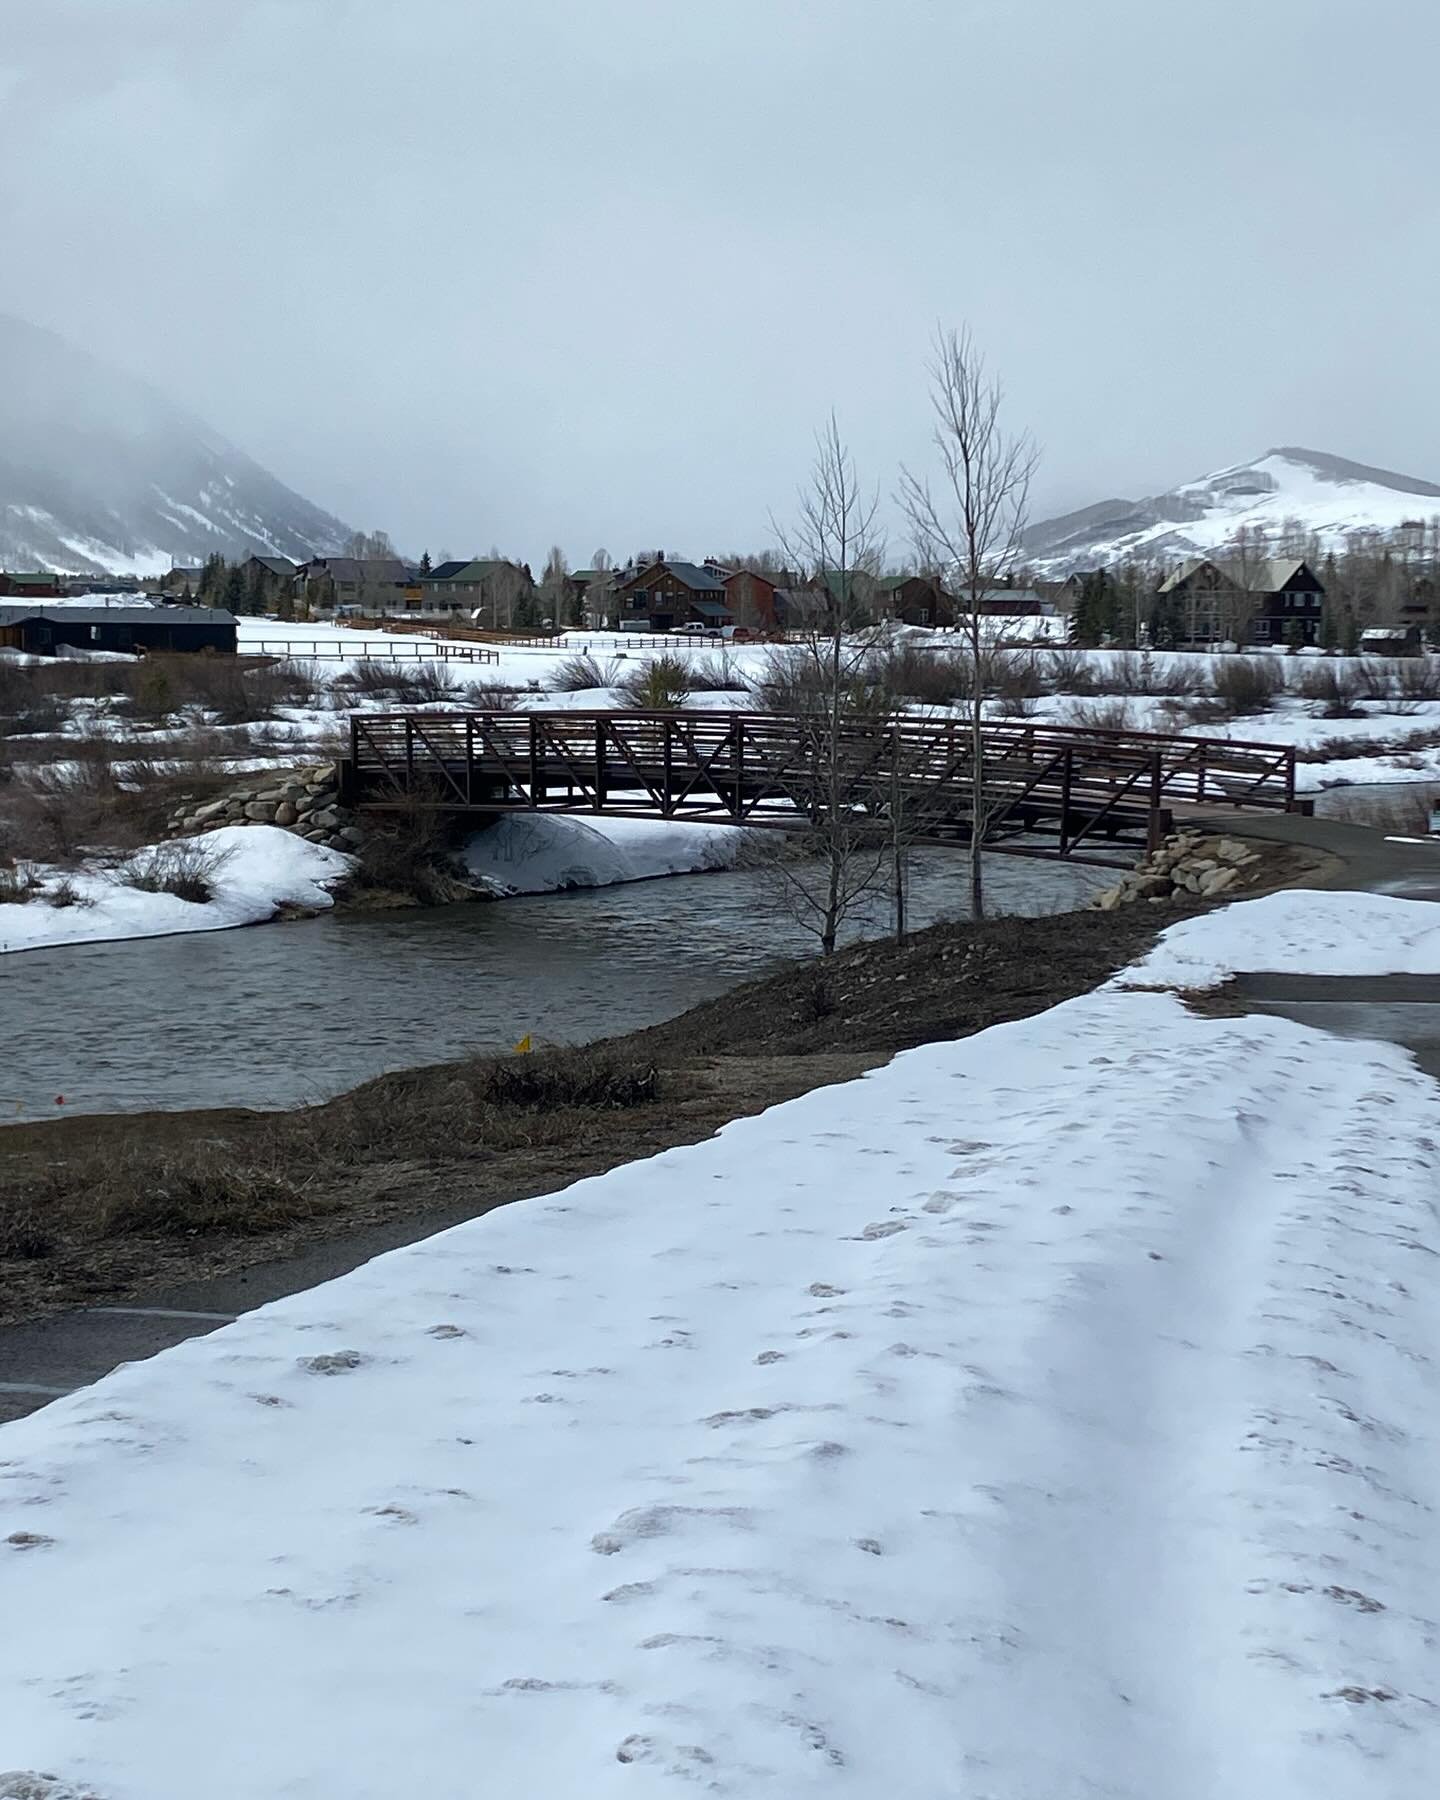 As Mother Nature is working on providing enough moisture for the flowers and rivers I hope you&rsquo;re enjoying your spring!

.
.
.
.
.
#bringingdreamshome #bluebirdrealestate #crestedbutte #crestedbuttecolorado #crestedbutterealestate #coloradoreal